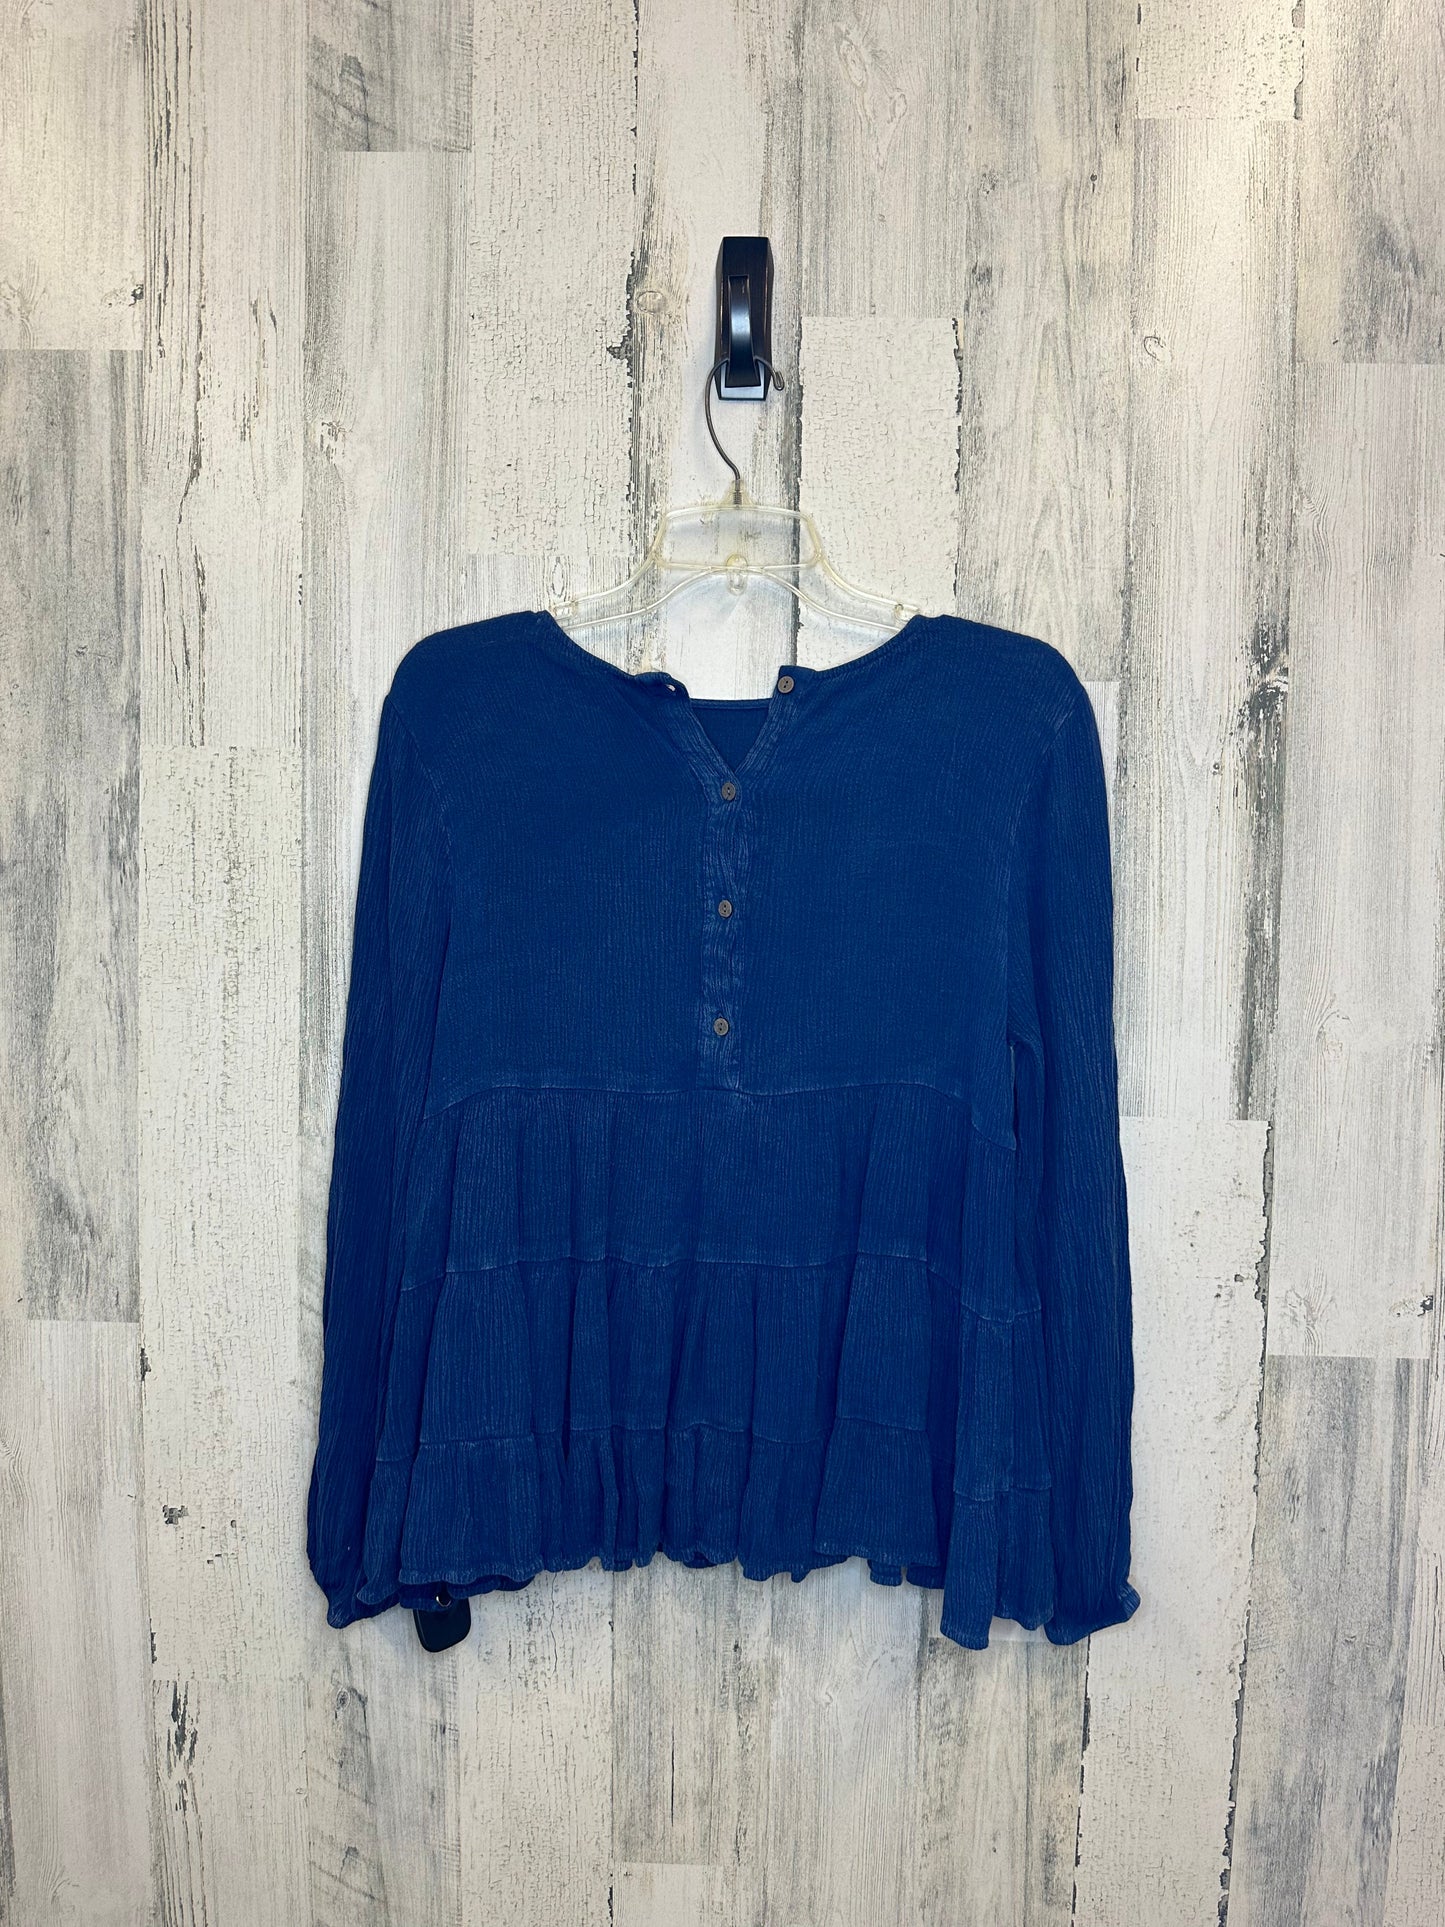 Top Long Sleeve By Altard State  Size: Xs